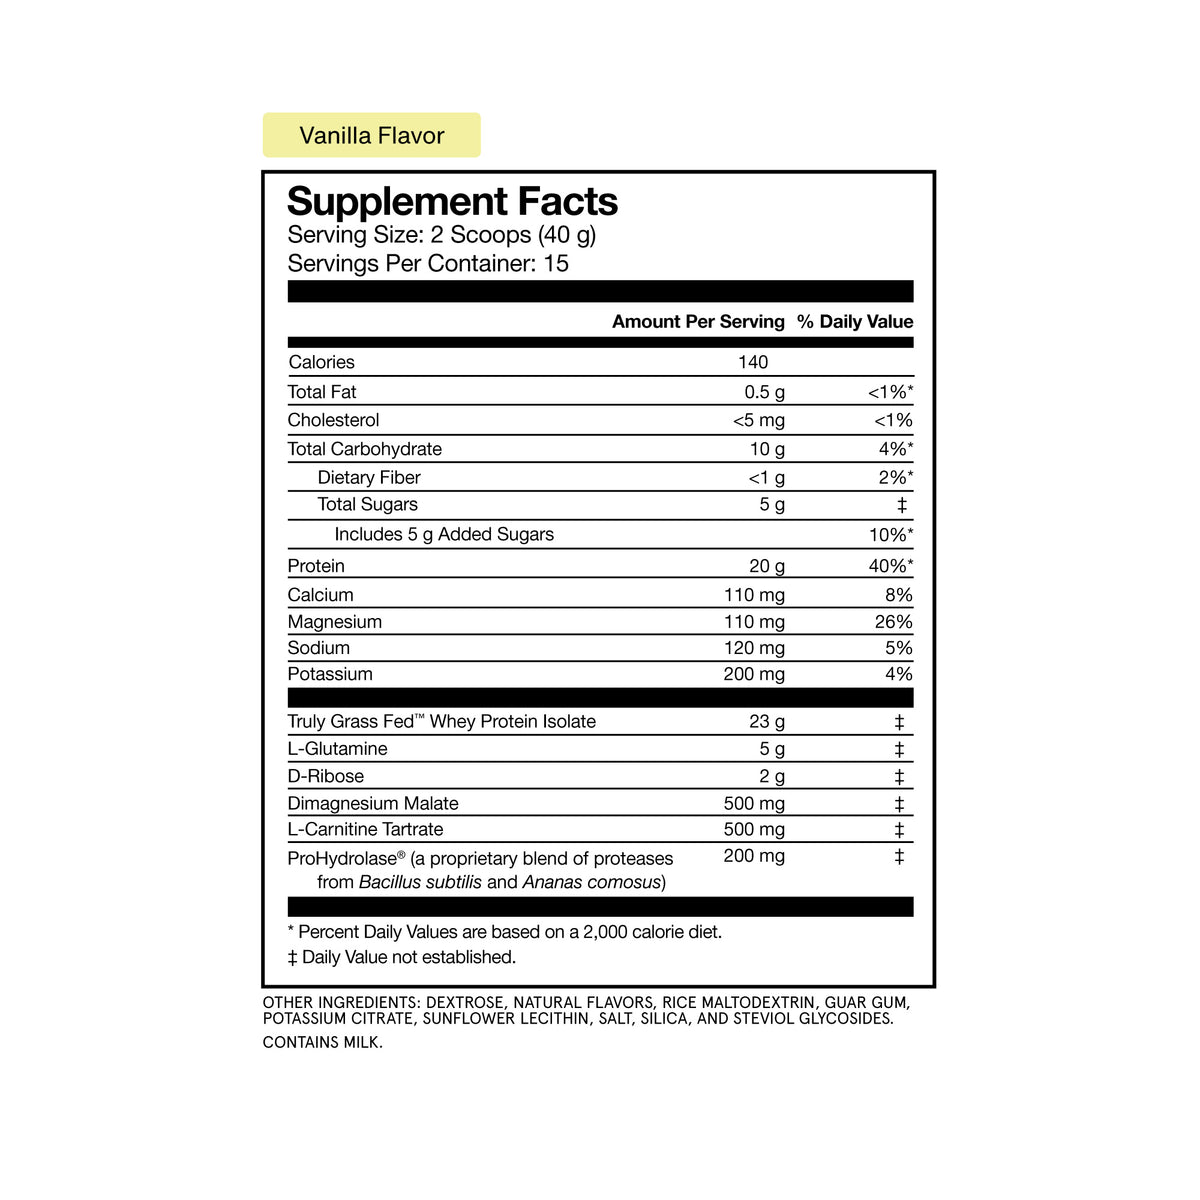 Vanilla flavored Recovery Supplement Facts